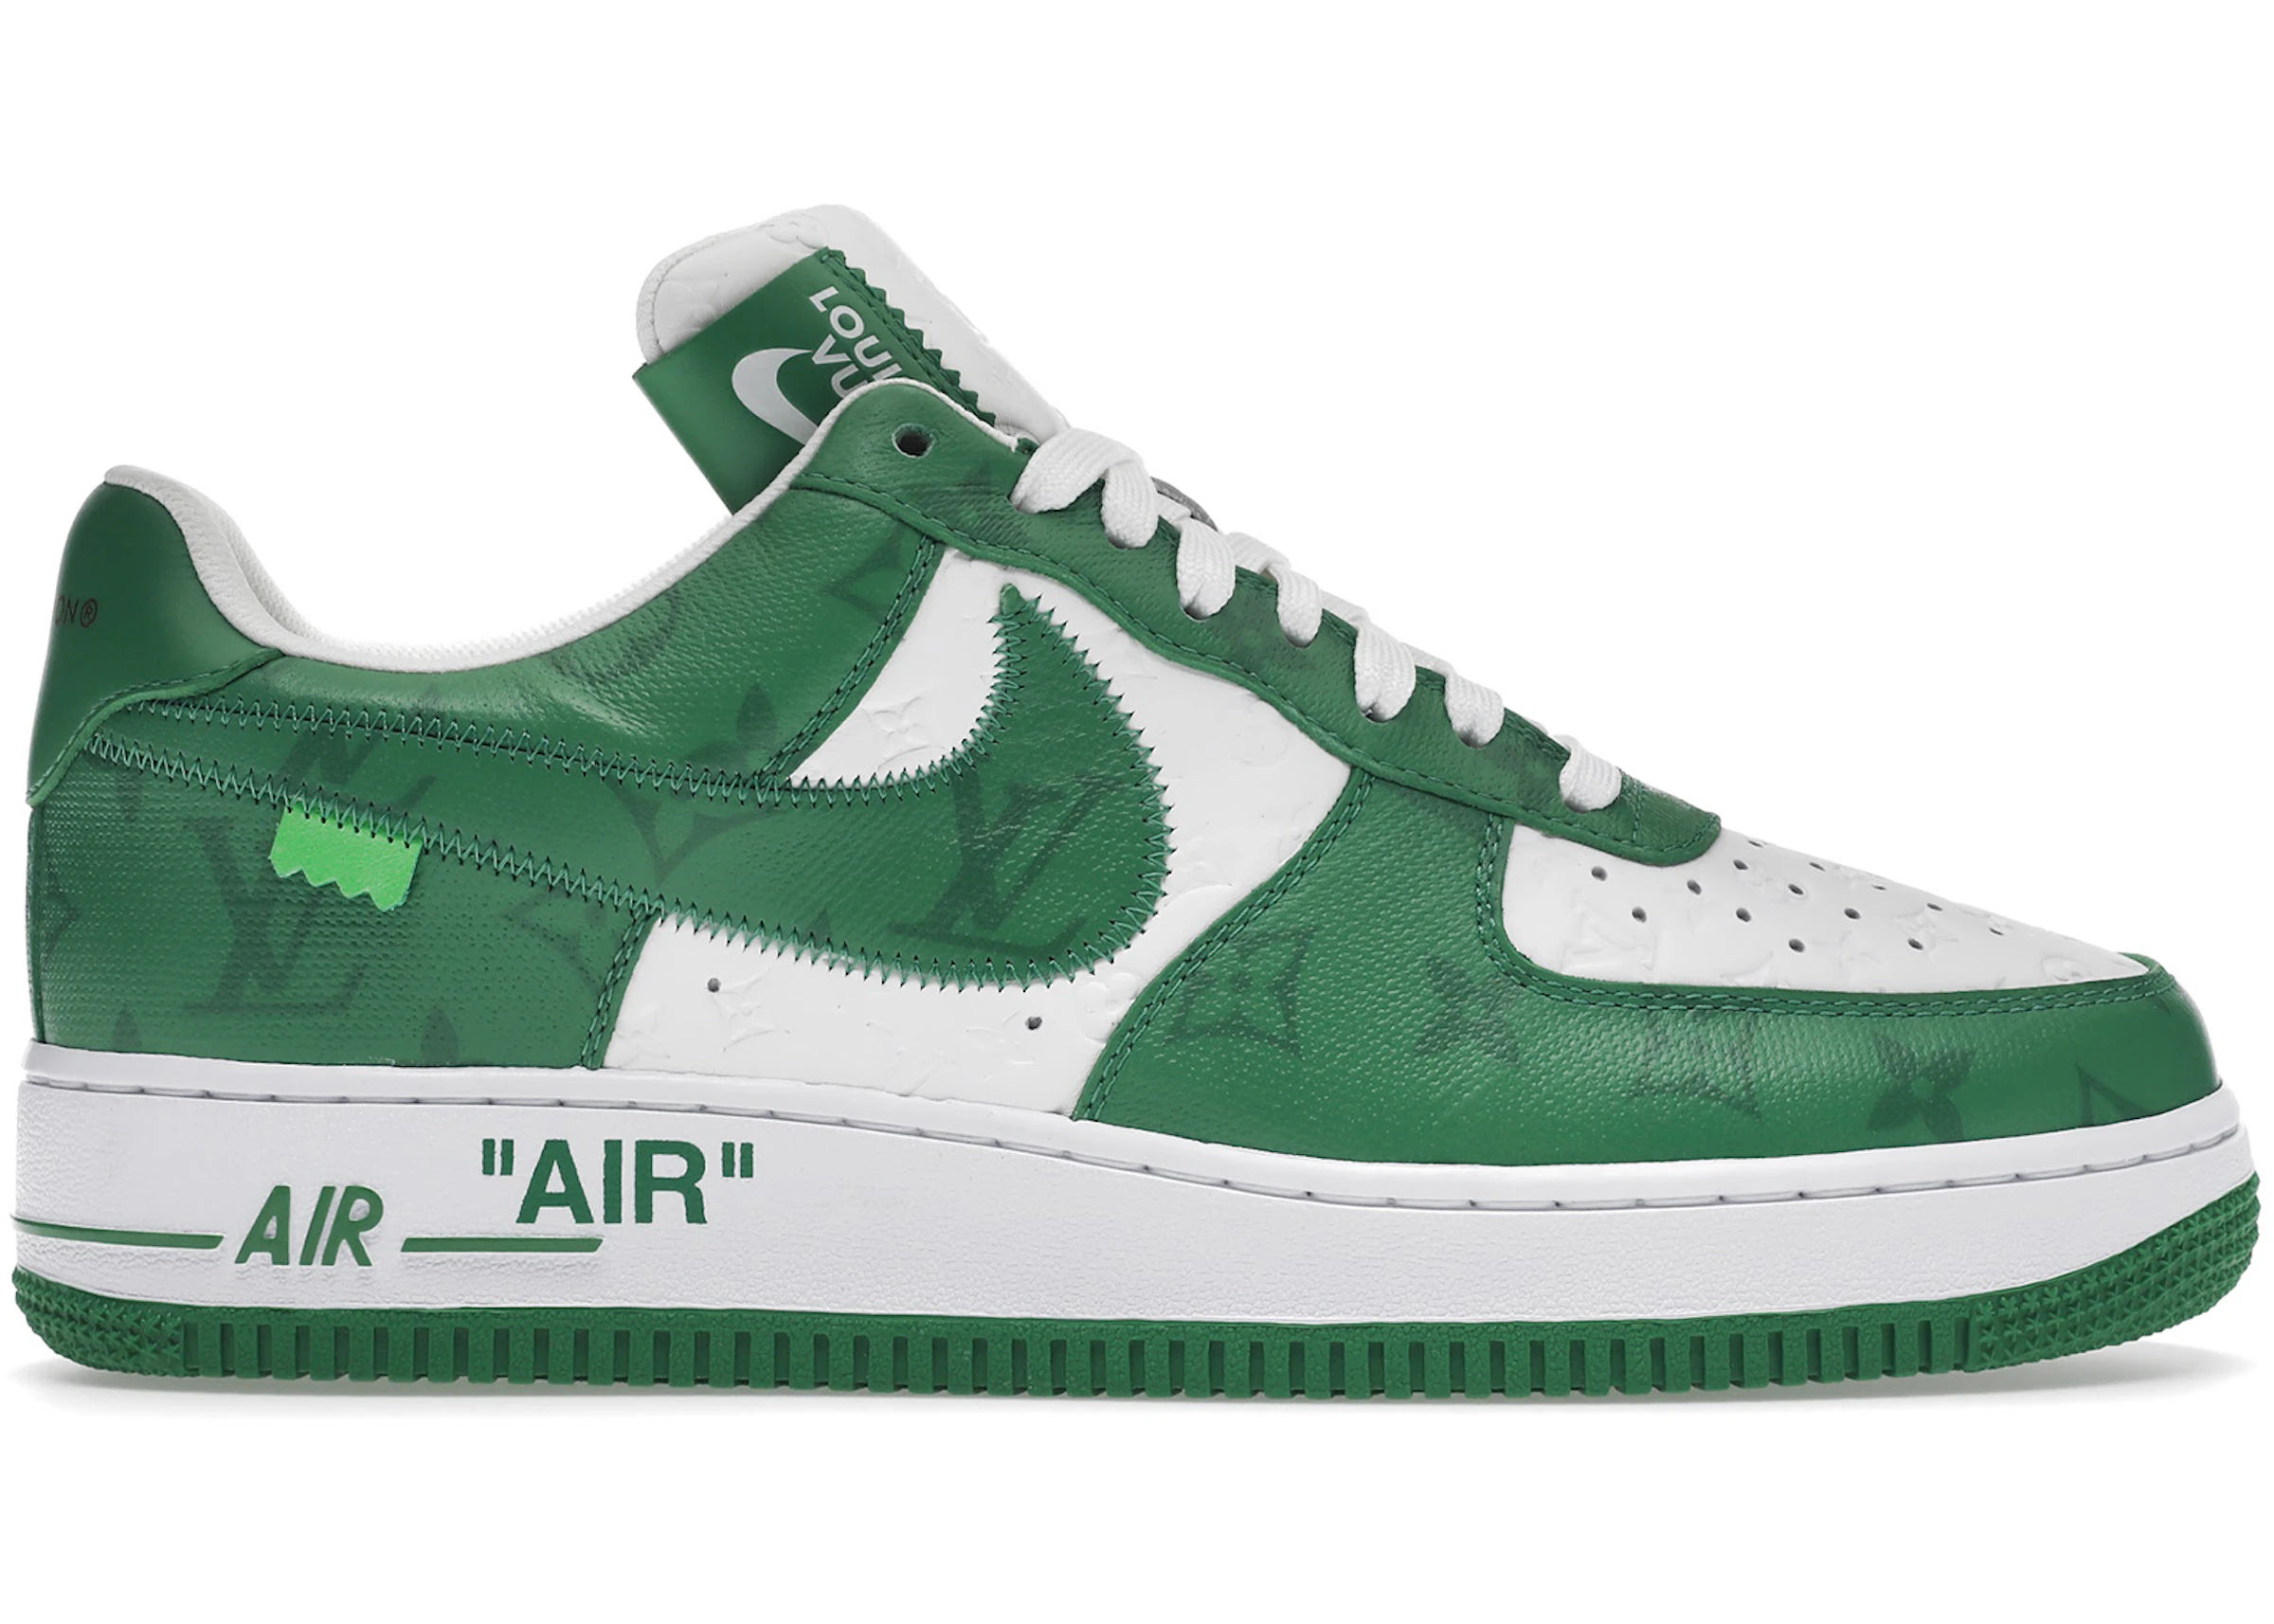 Mentality To accelerate taxi Louis Vuitton Nike Air Force 1 Low By Virgil Abloh White Green - - US